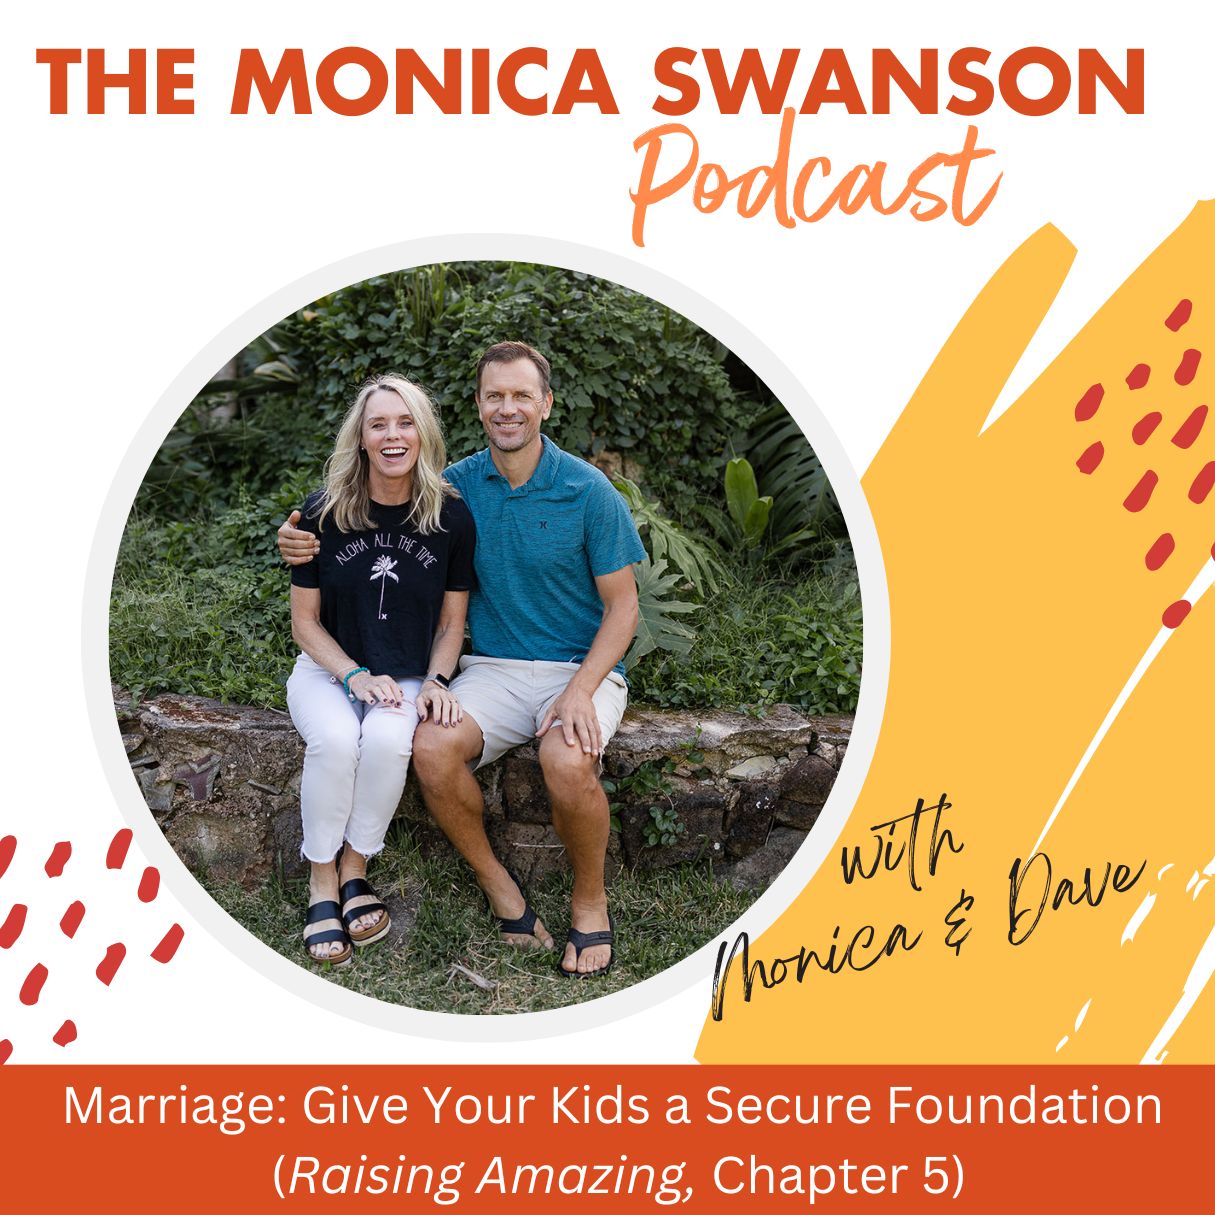 Marriage: Give Your Kids a Secure Foundation. Raising Amazing Chapter 5 with Monica and Dave